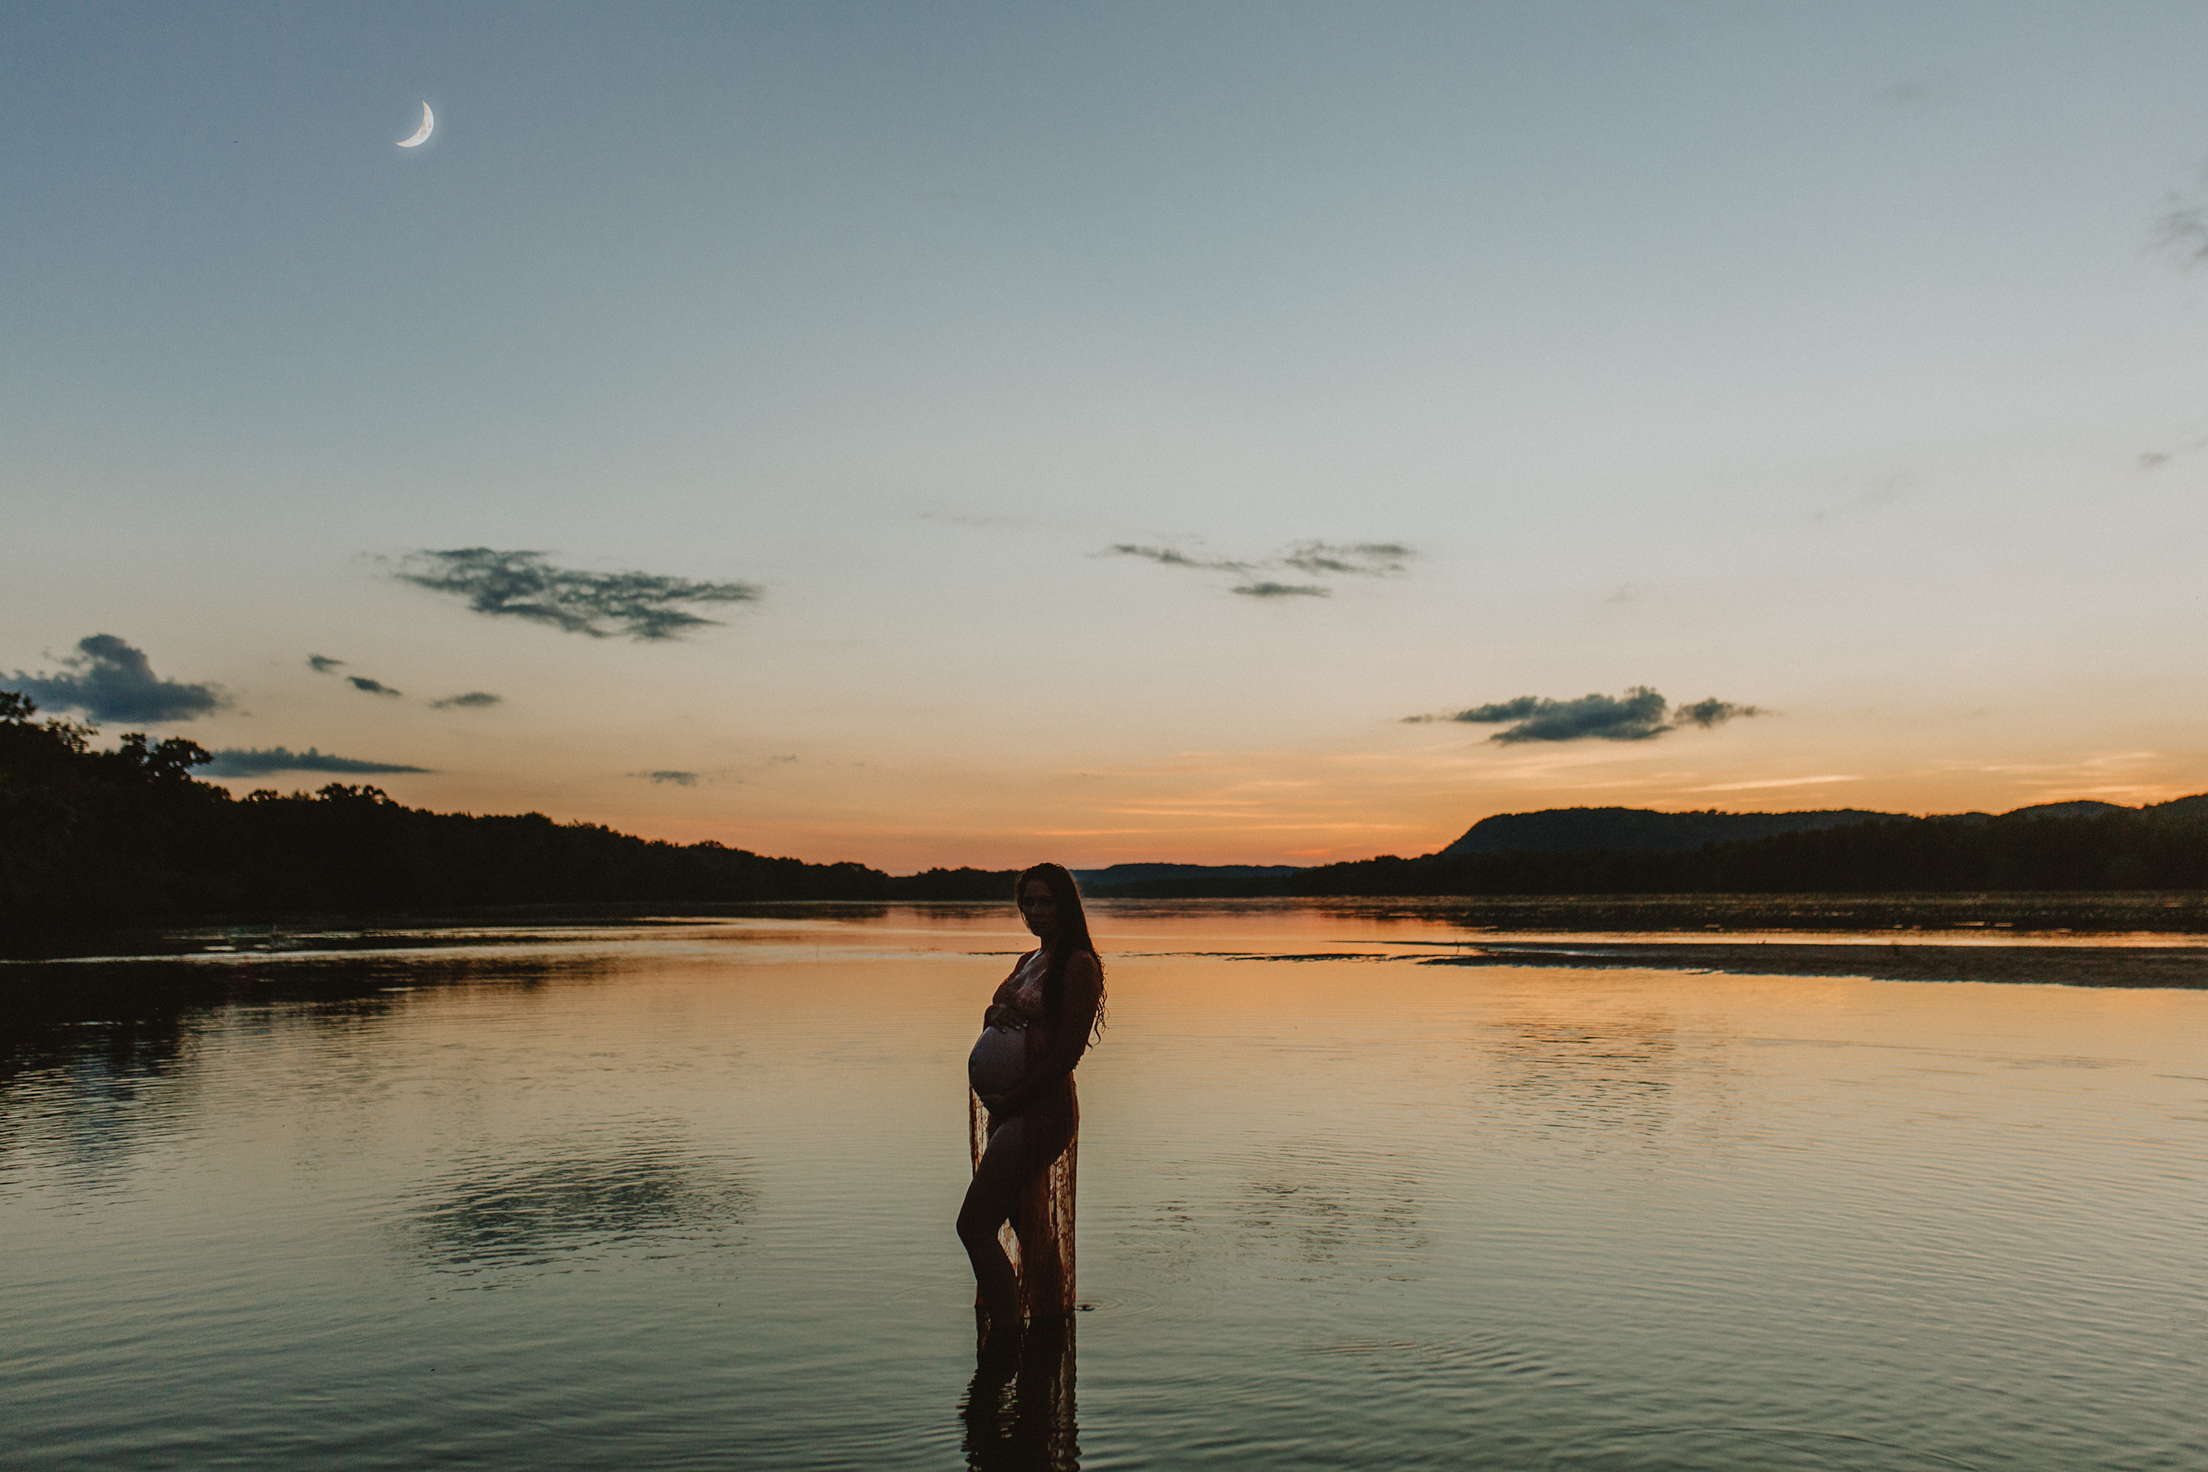 Madison, Wisconsin maternity photography by Jill Koskelin. Pregnant mother wading in the water by moonlight at sunset.